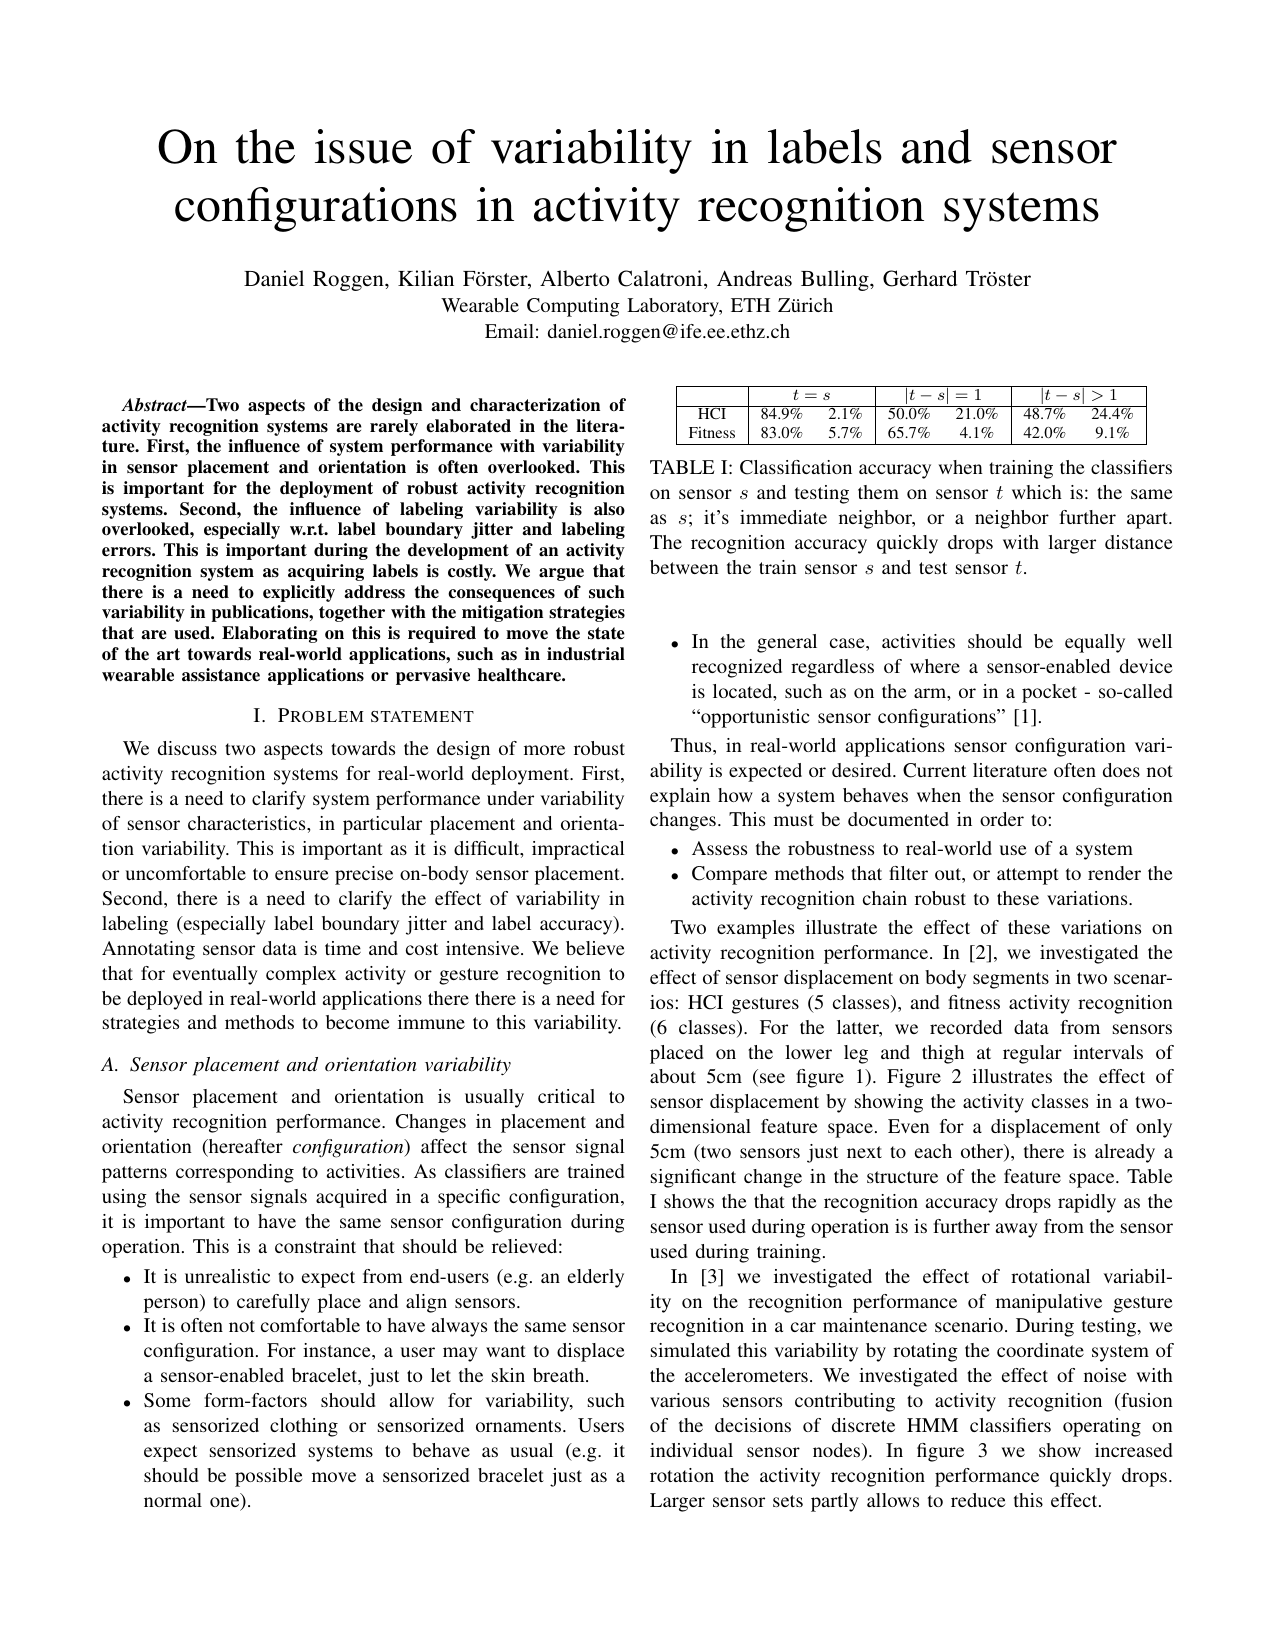 On the issue of variability in labels and sensor configurations in activity recognition systems